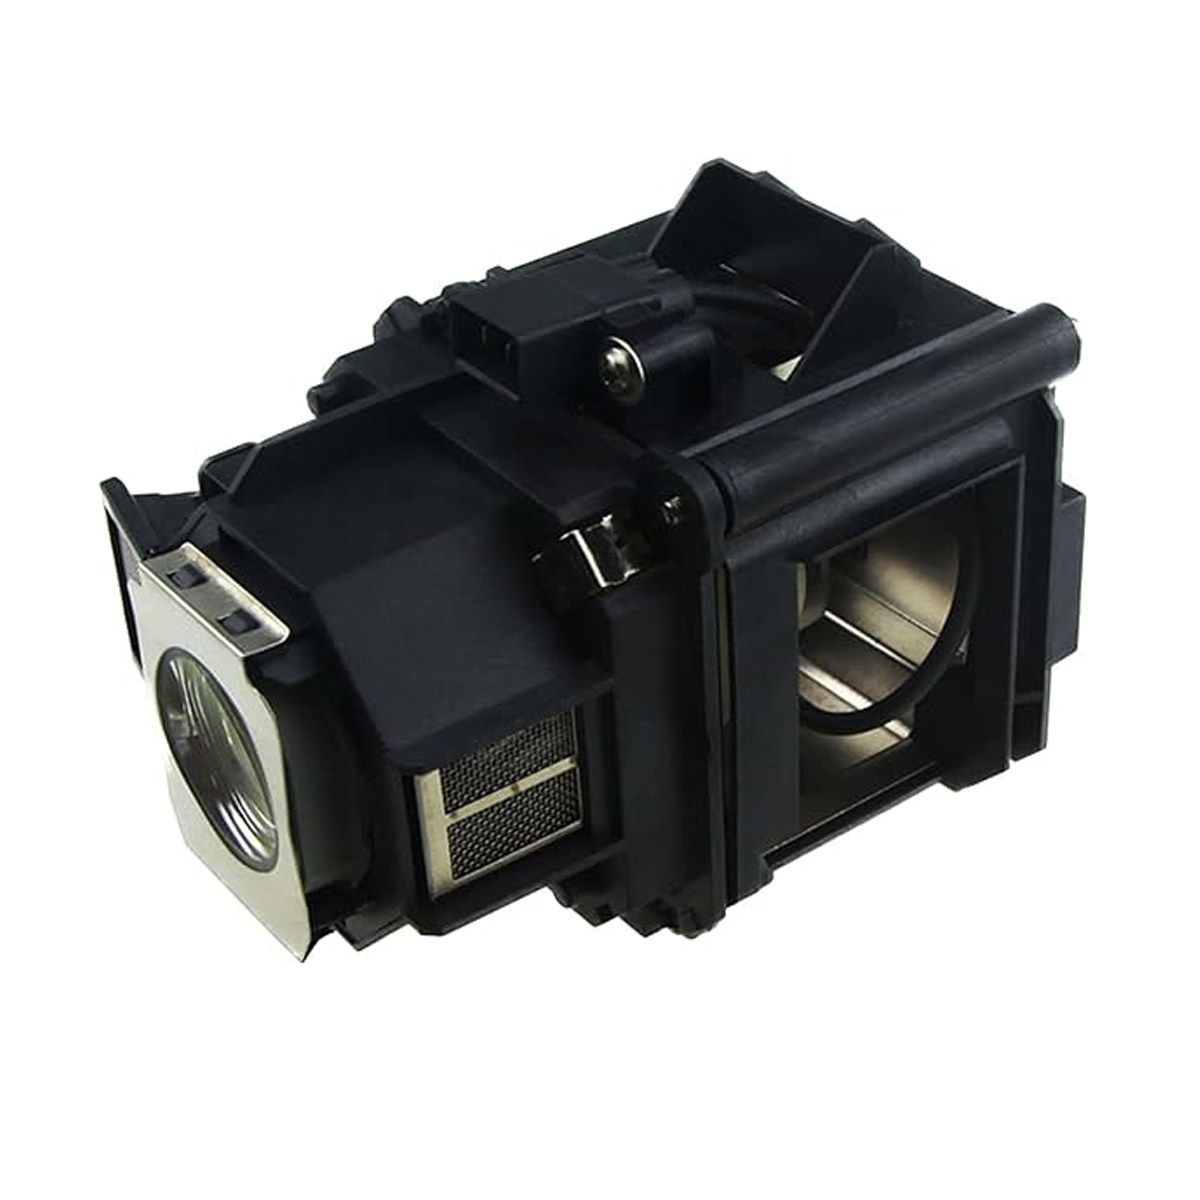 Replacement Original projector lamp ELPLP62 For EPSON EB-G5450WU/EB-G5500 /EB-G5600